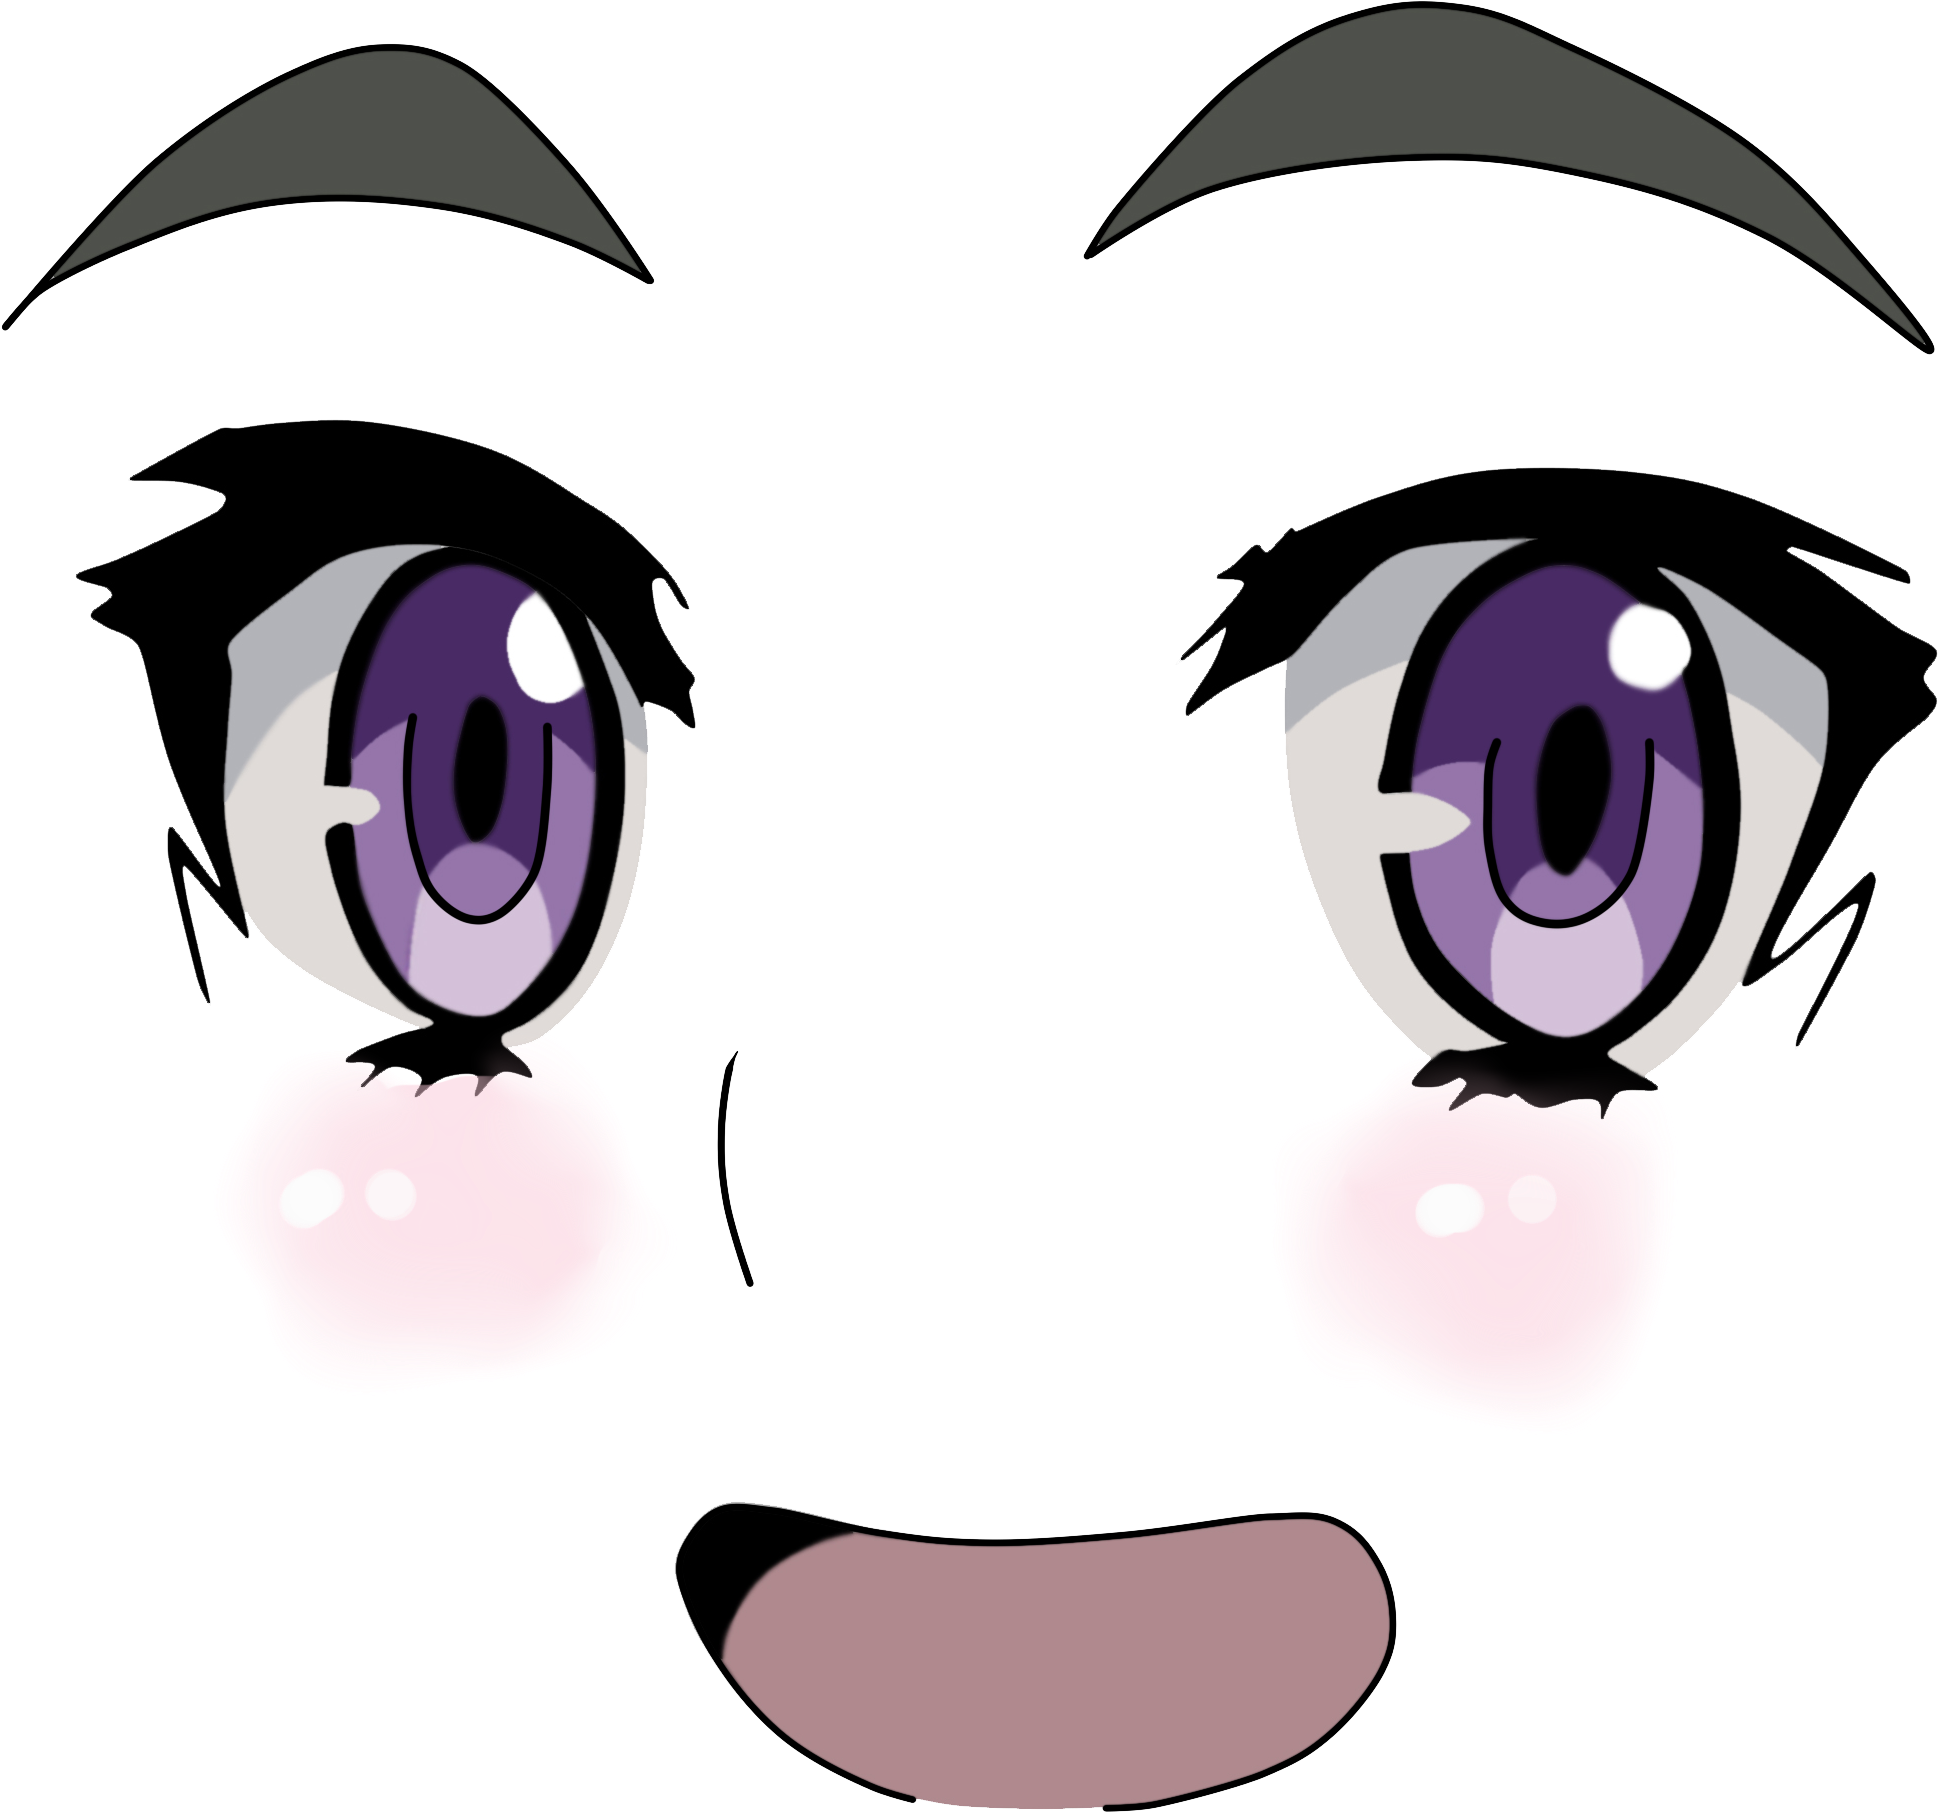 Face Eye Nose Facial Expression Purple Violet Head - Anime Eyes No Background (1663x1568)